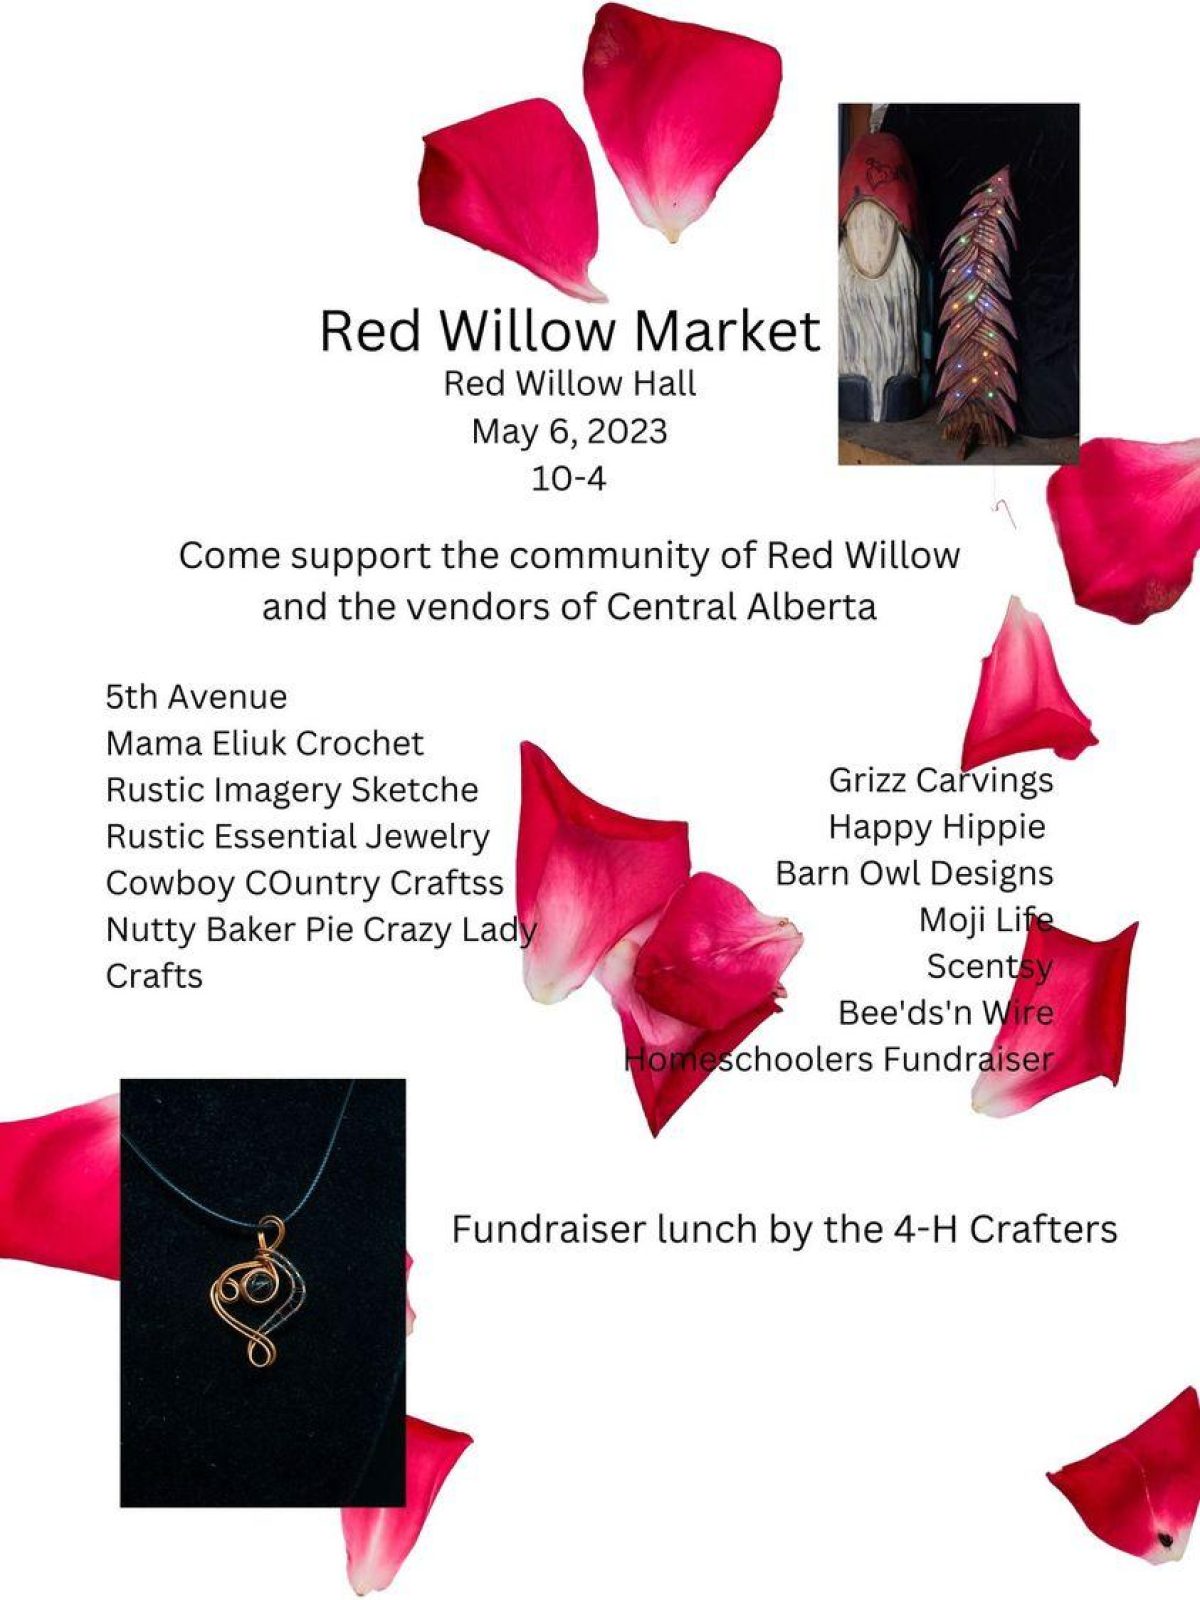 Red willow market